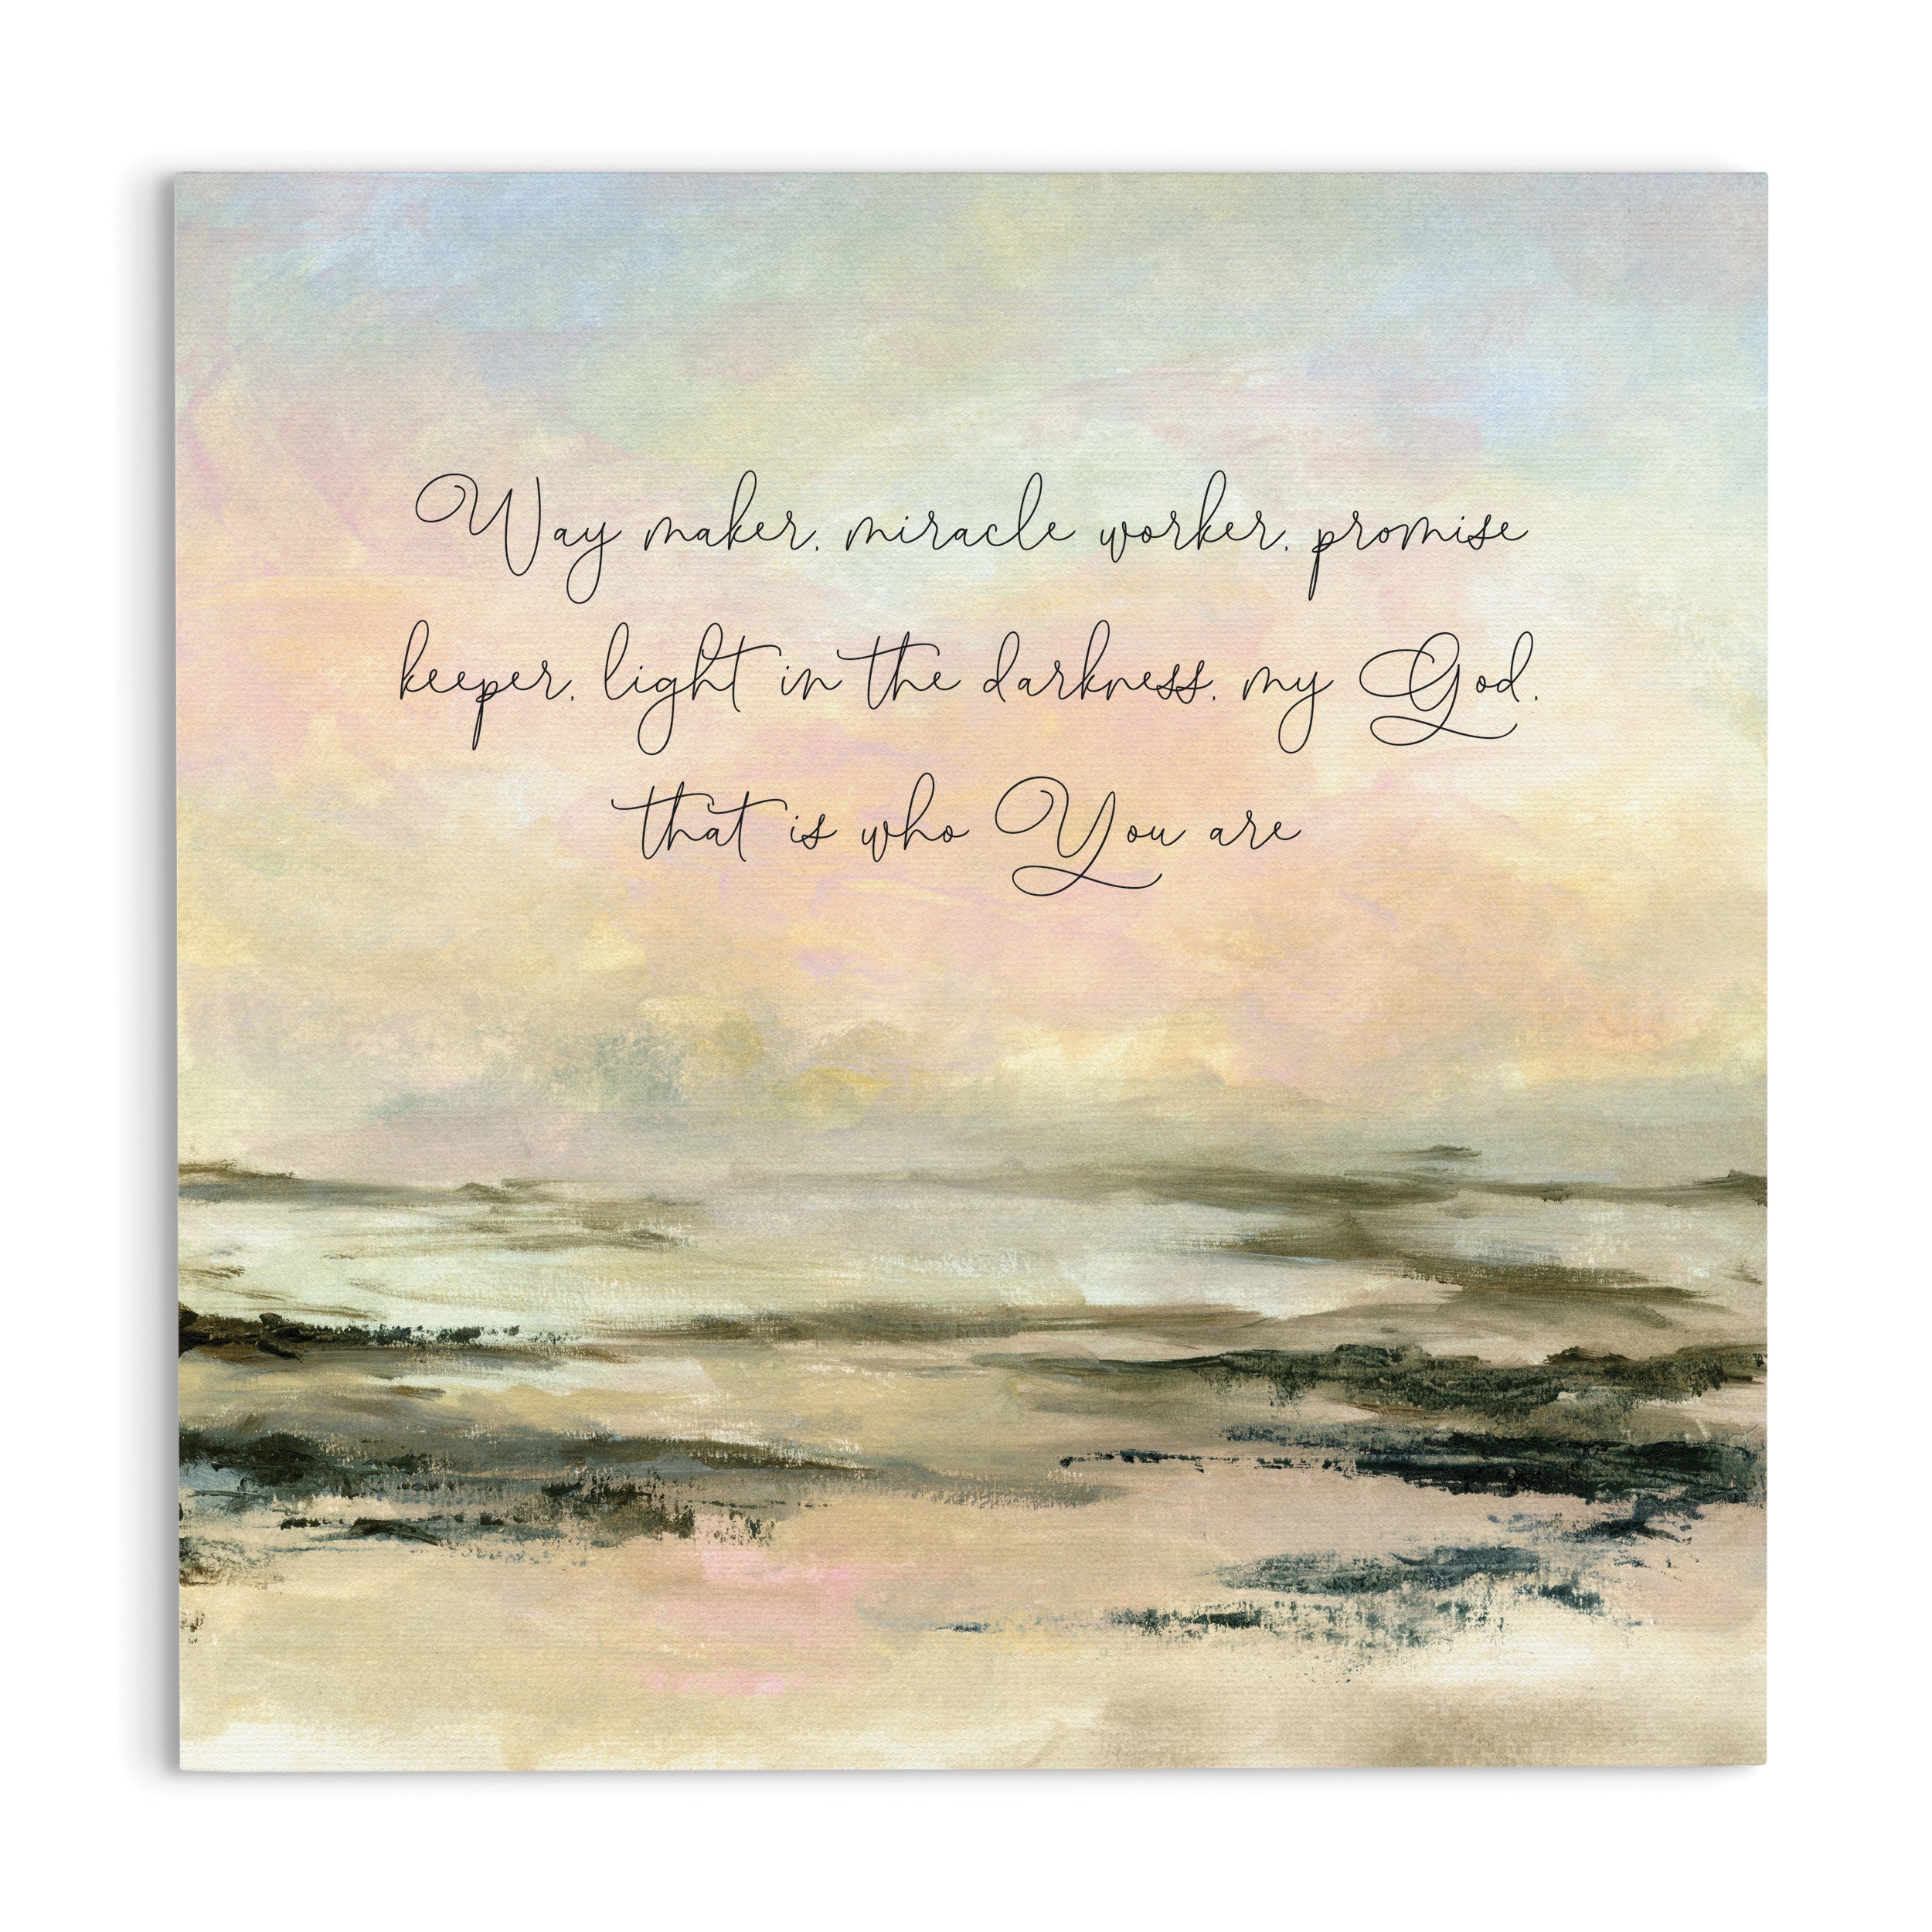 Way Maker Miracle Worker Promise Keeper Light in The Darkness My God This  is Who You are: Inspirational Journal - Notebook to Write In for Men -  Women